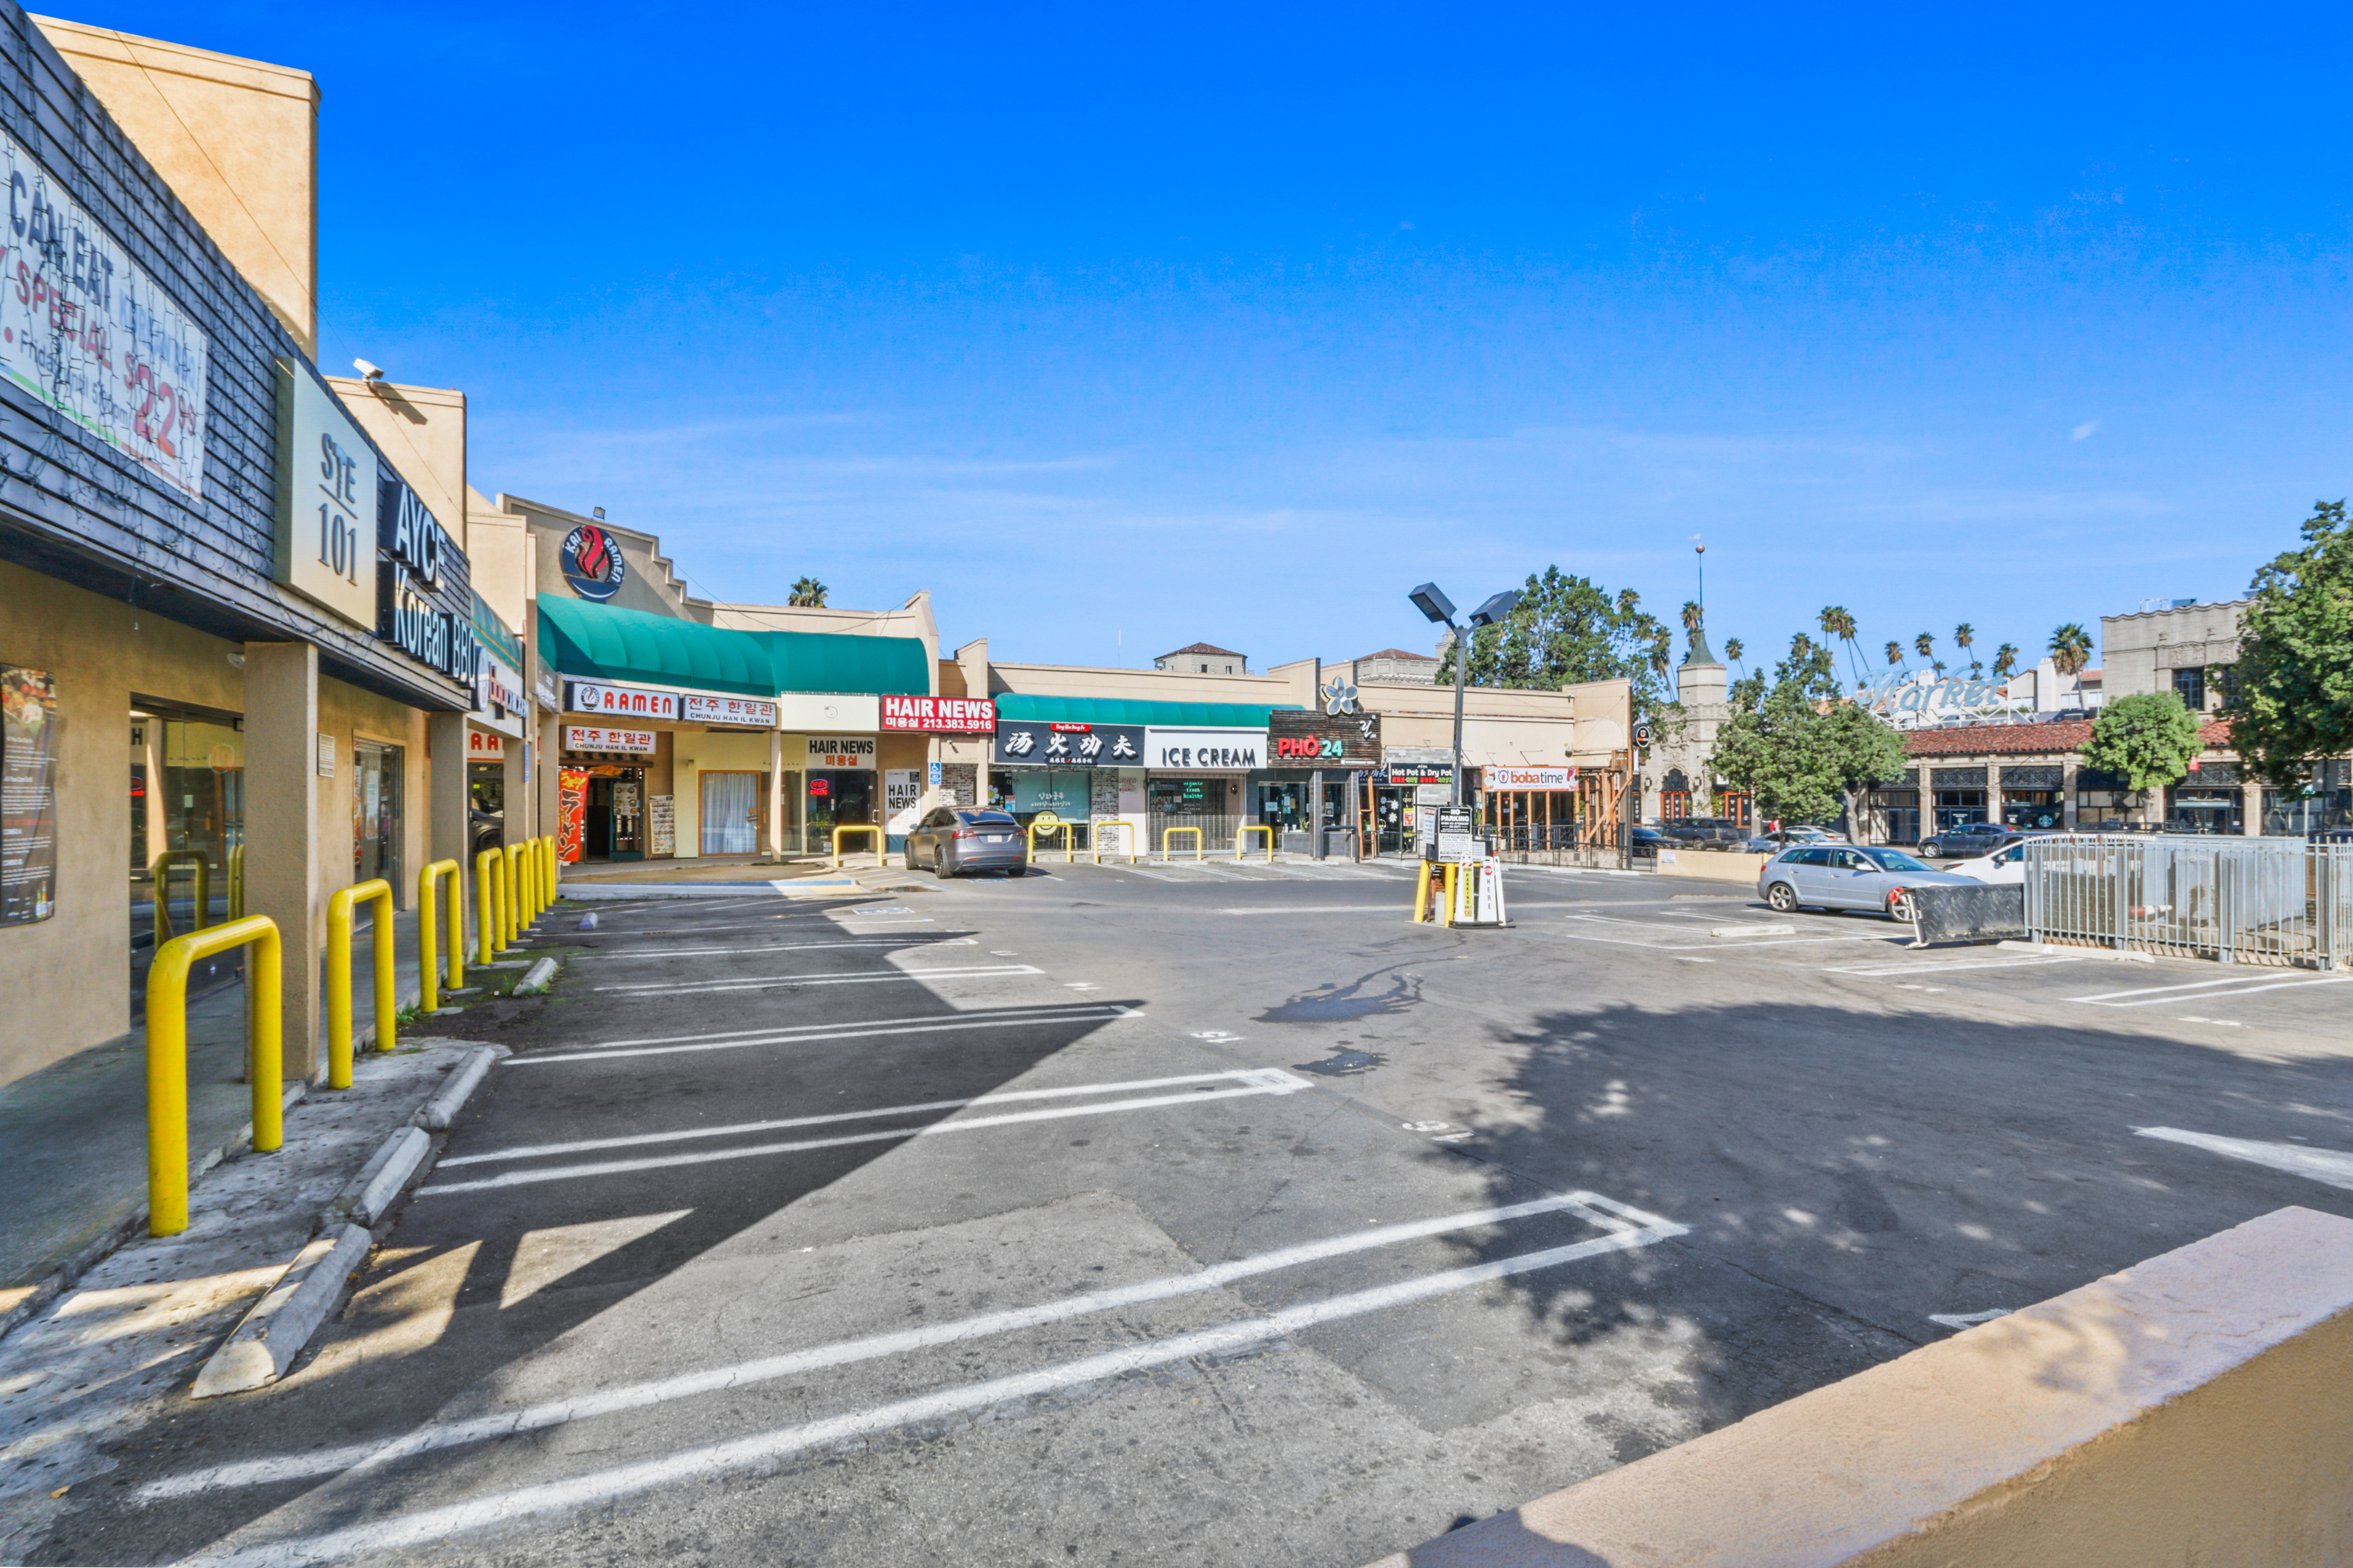 New Listing for Sale | Leased Investment Opportunity in Prime Koreatown Location